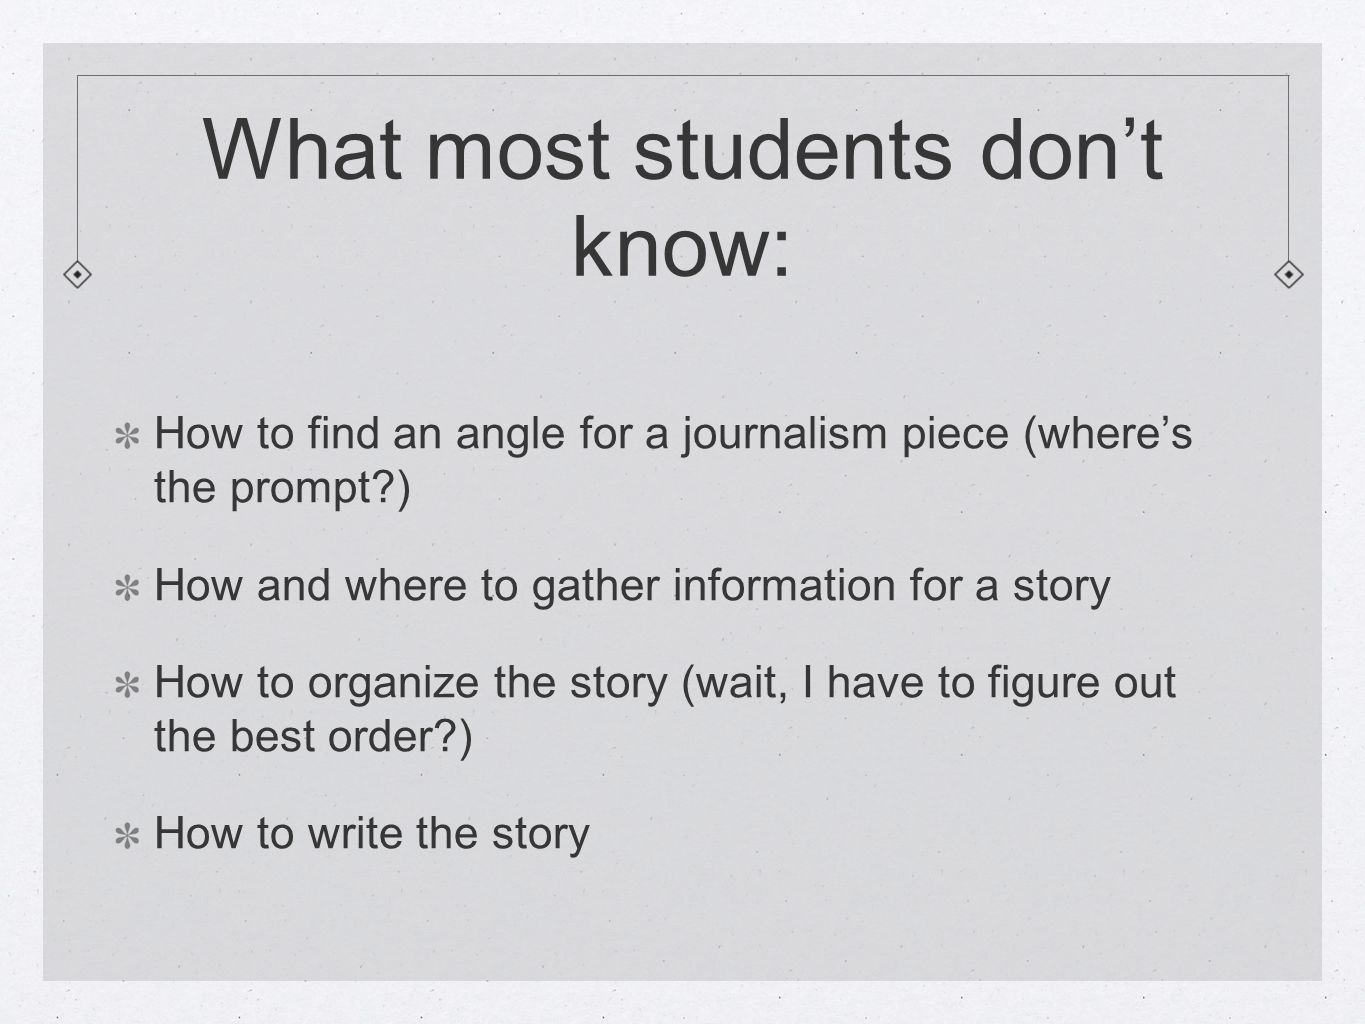 What most students don’t know: How to find an angle for a journalism piece (where’s the prompt ) How and where to gather information for a story How to organize the story (wait, I have to figure out the best order ) How to write the story